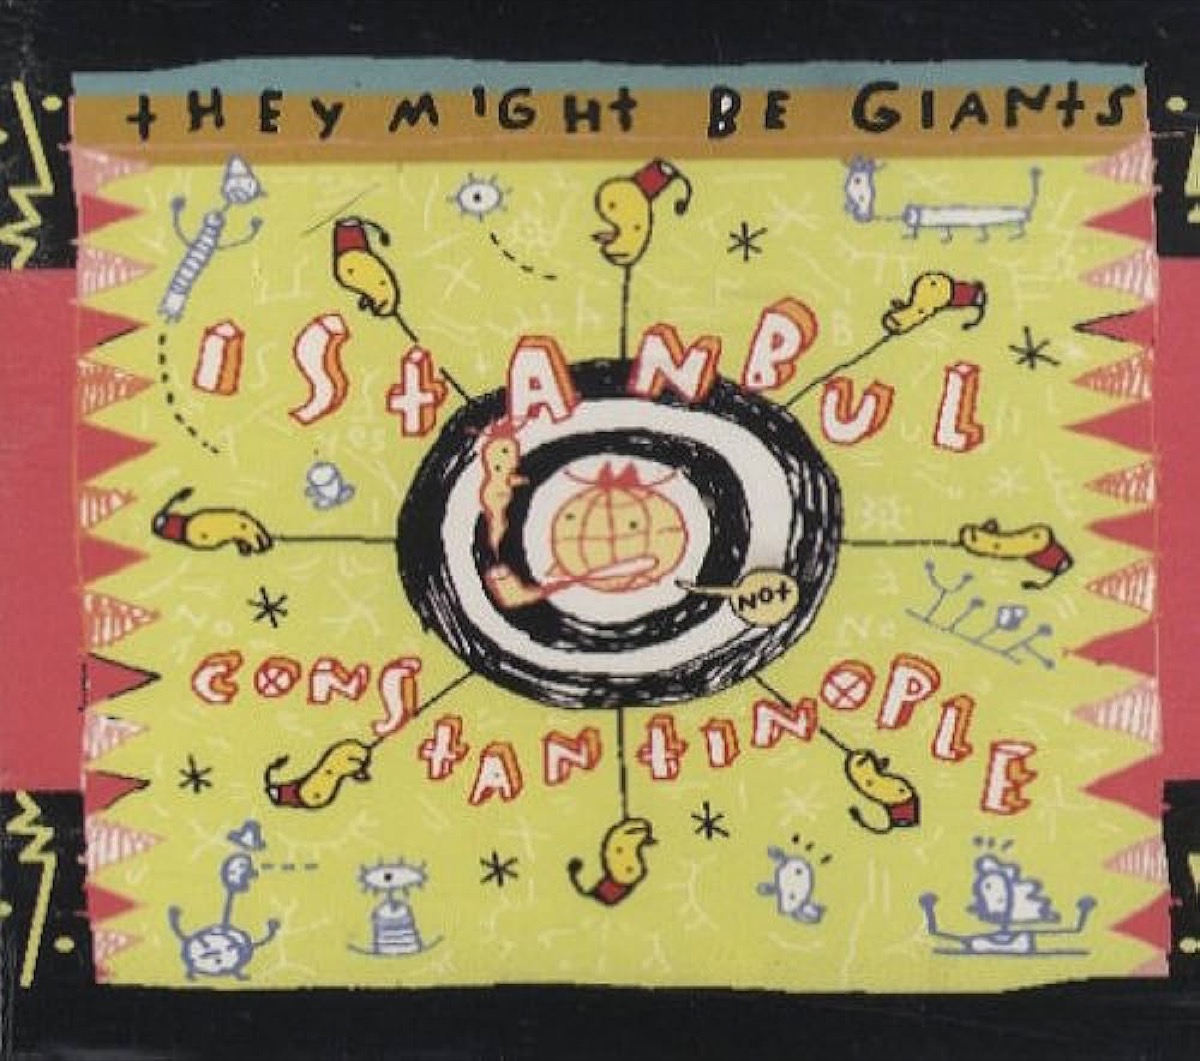 They Might Be Giants "Istanbul (Not Constantinople)" cover